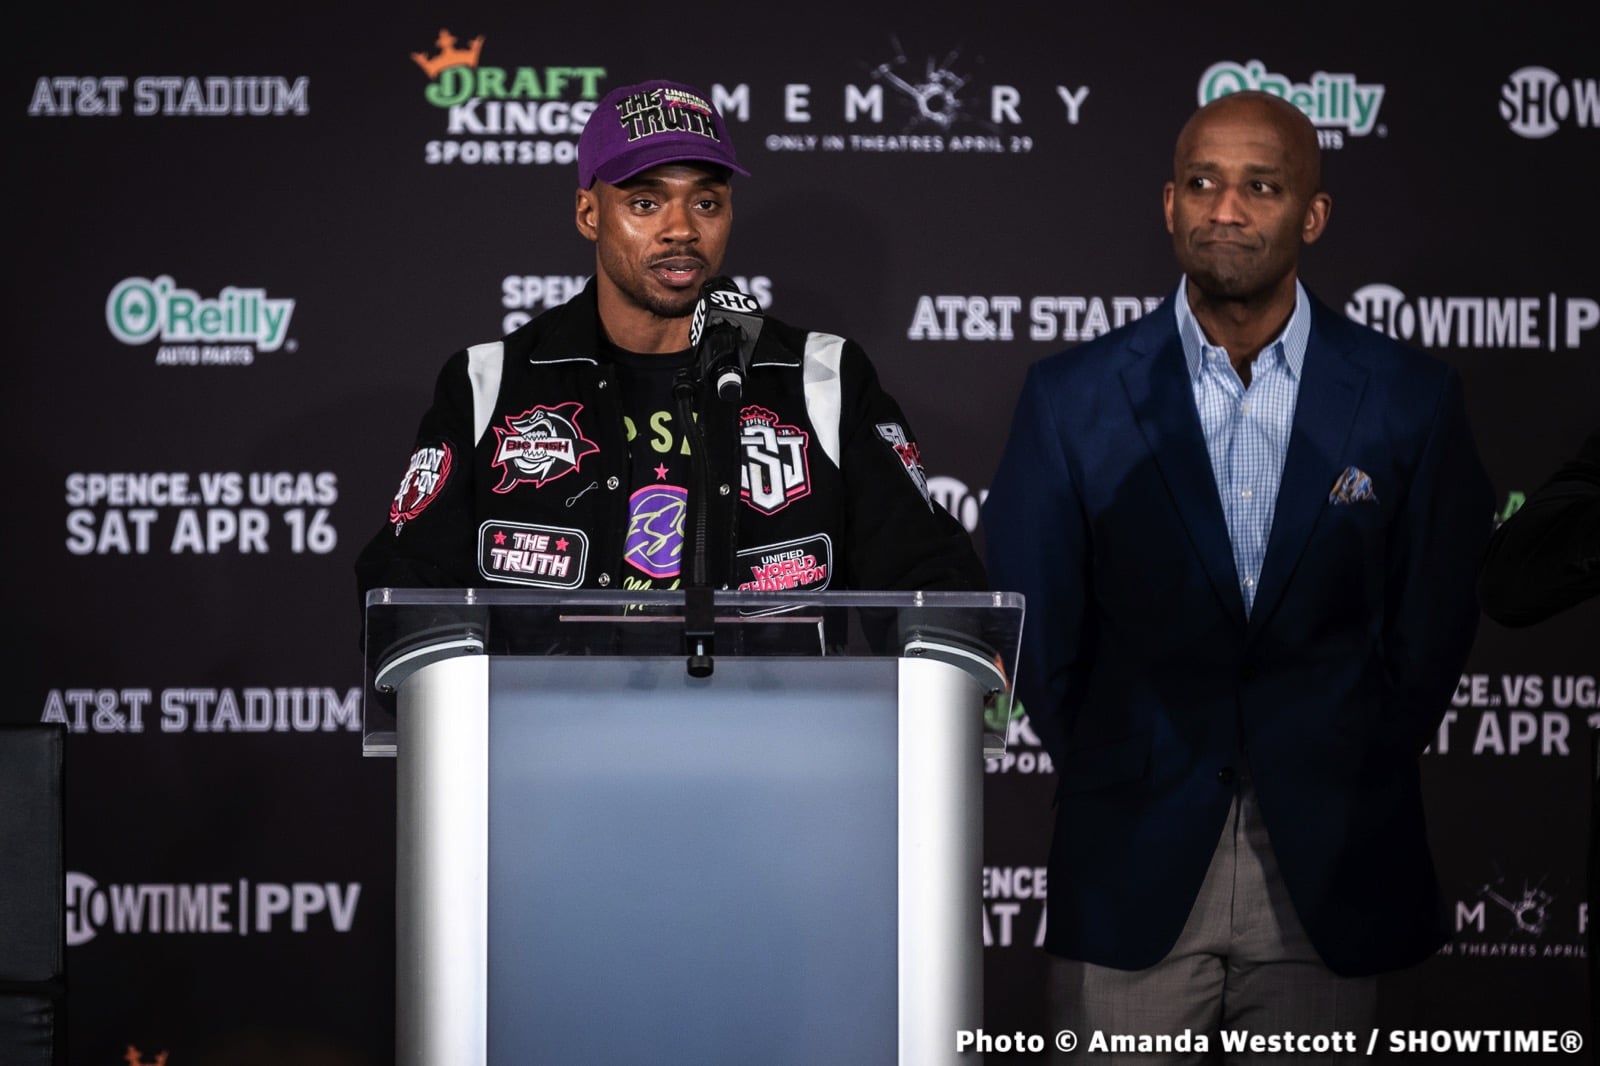 Image: Yordenis Ugas - Errol Spence Jr. - press conference quotes & photos for Saturday